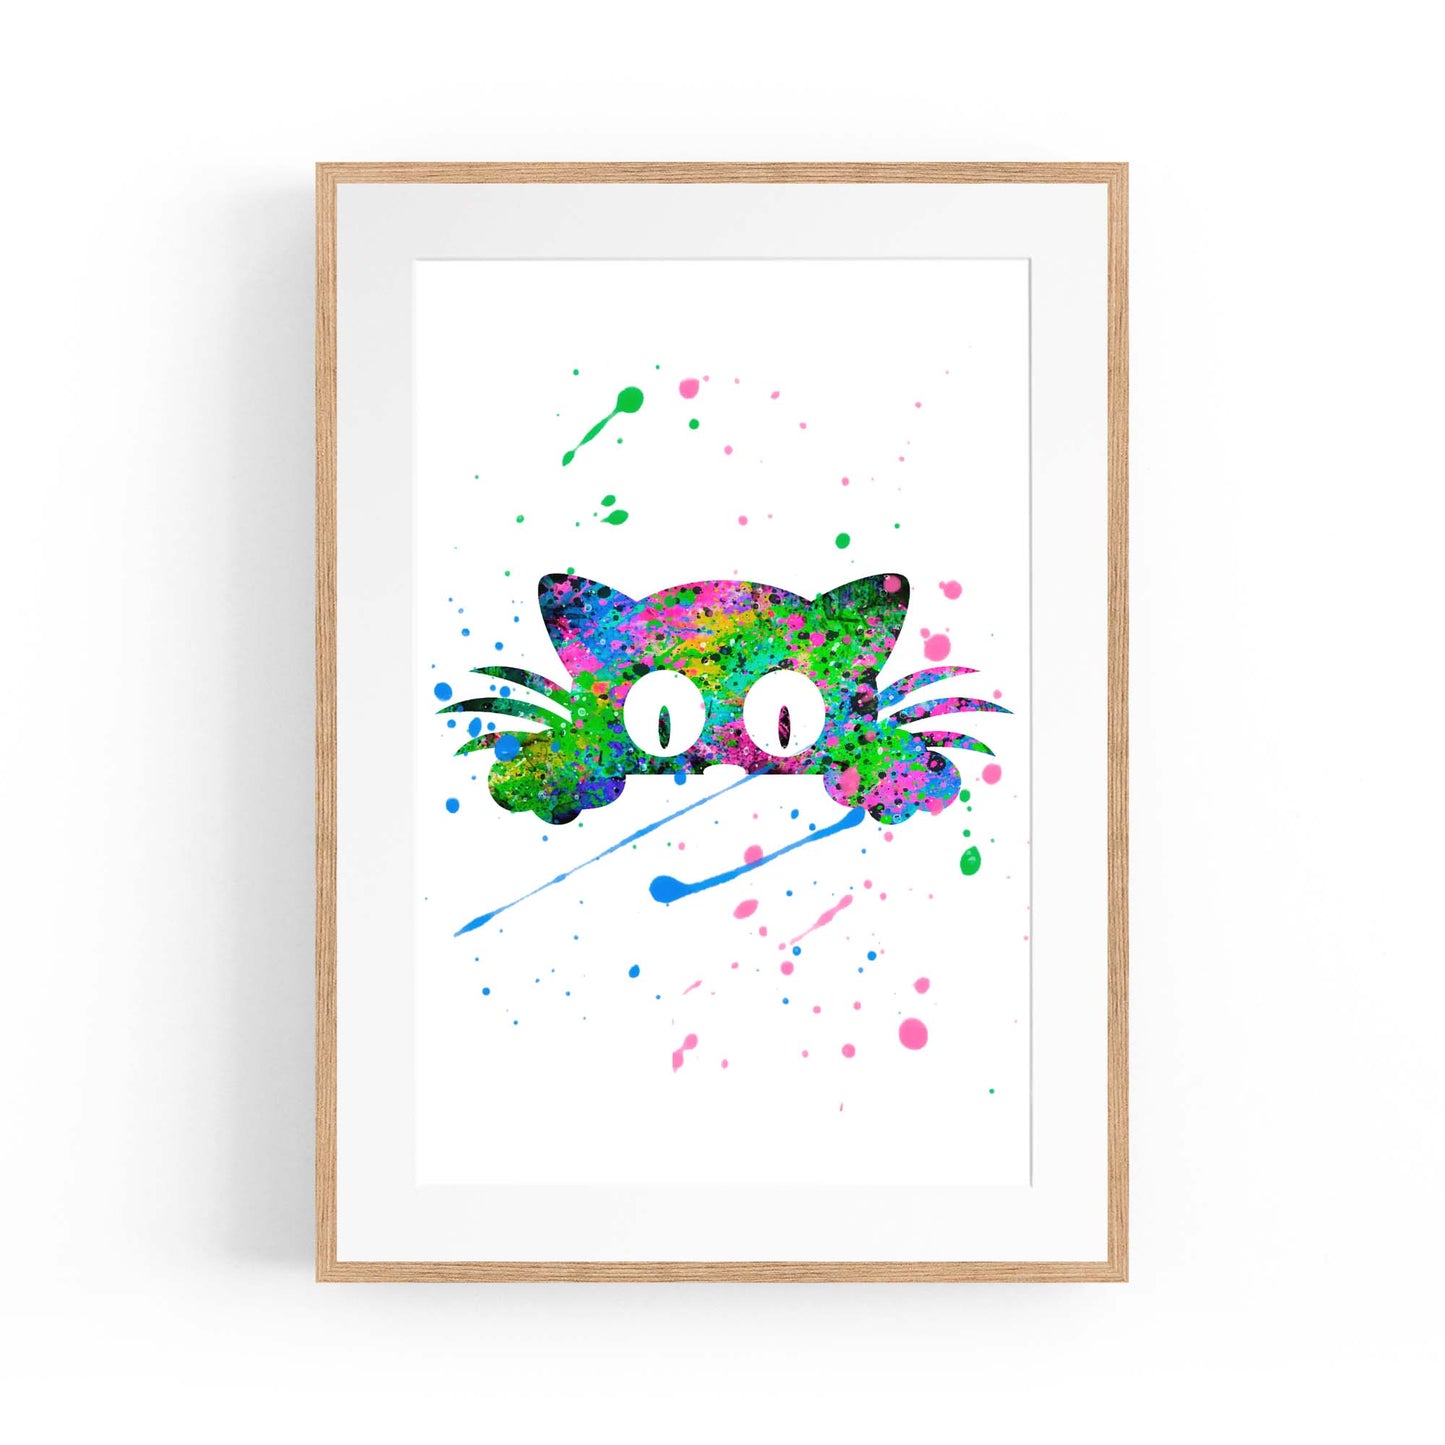 Cute Cat Painting Colourful Animal Wall Art #2 - The Affordable Art Company